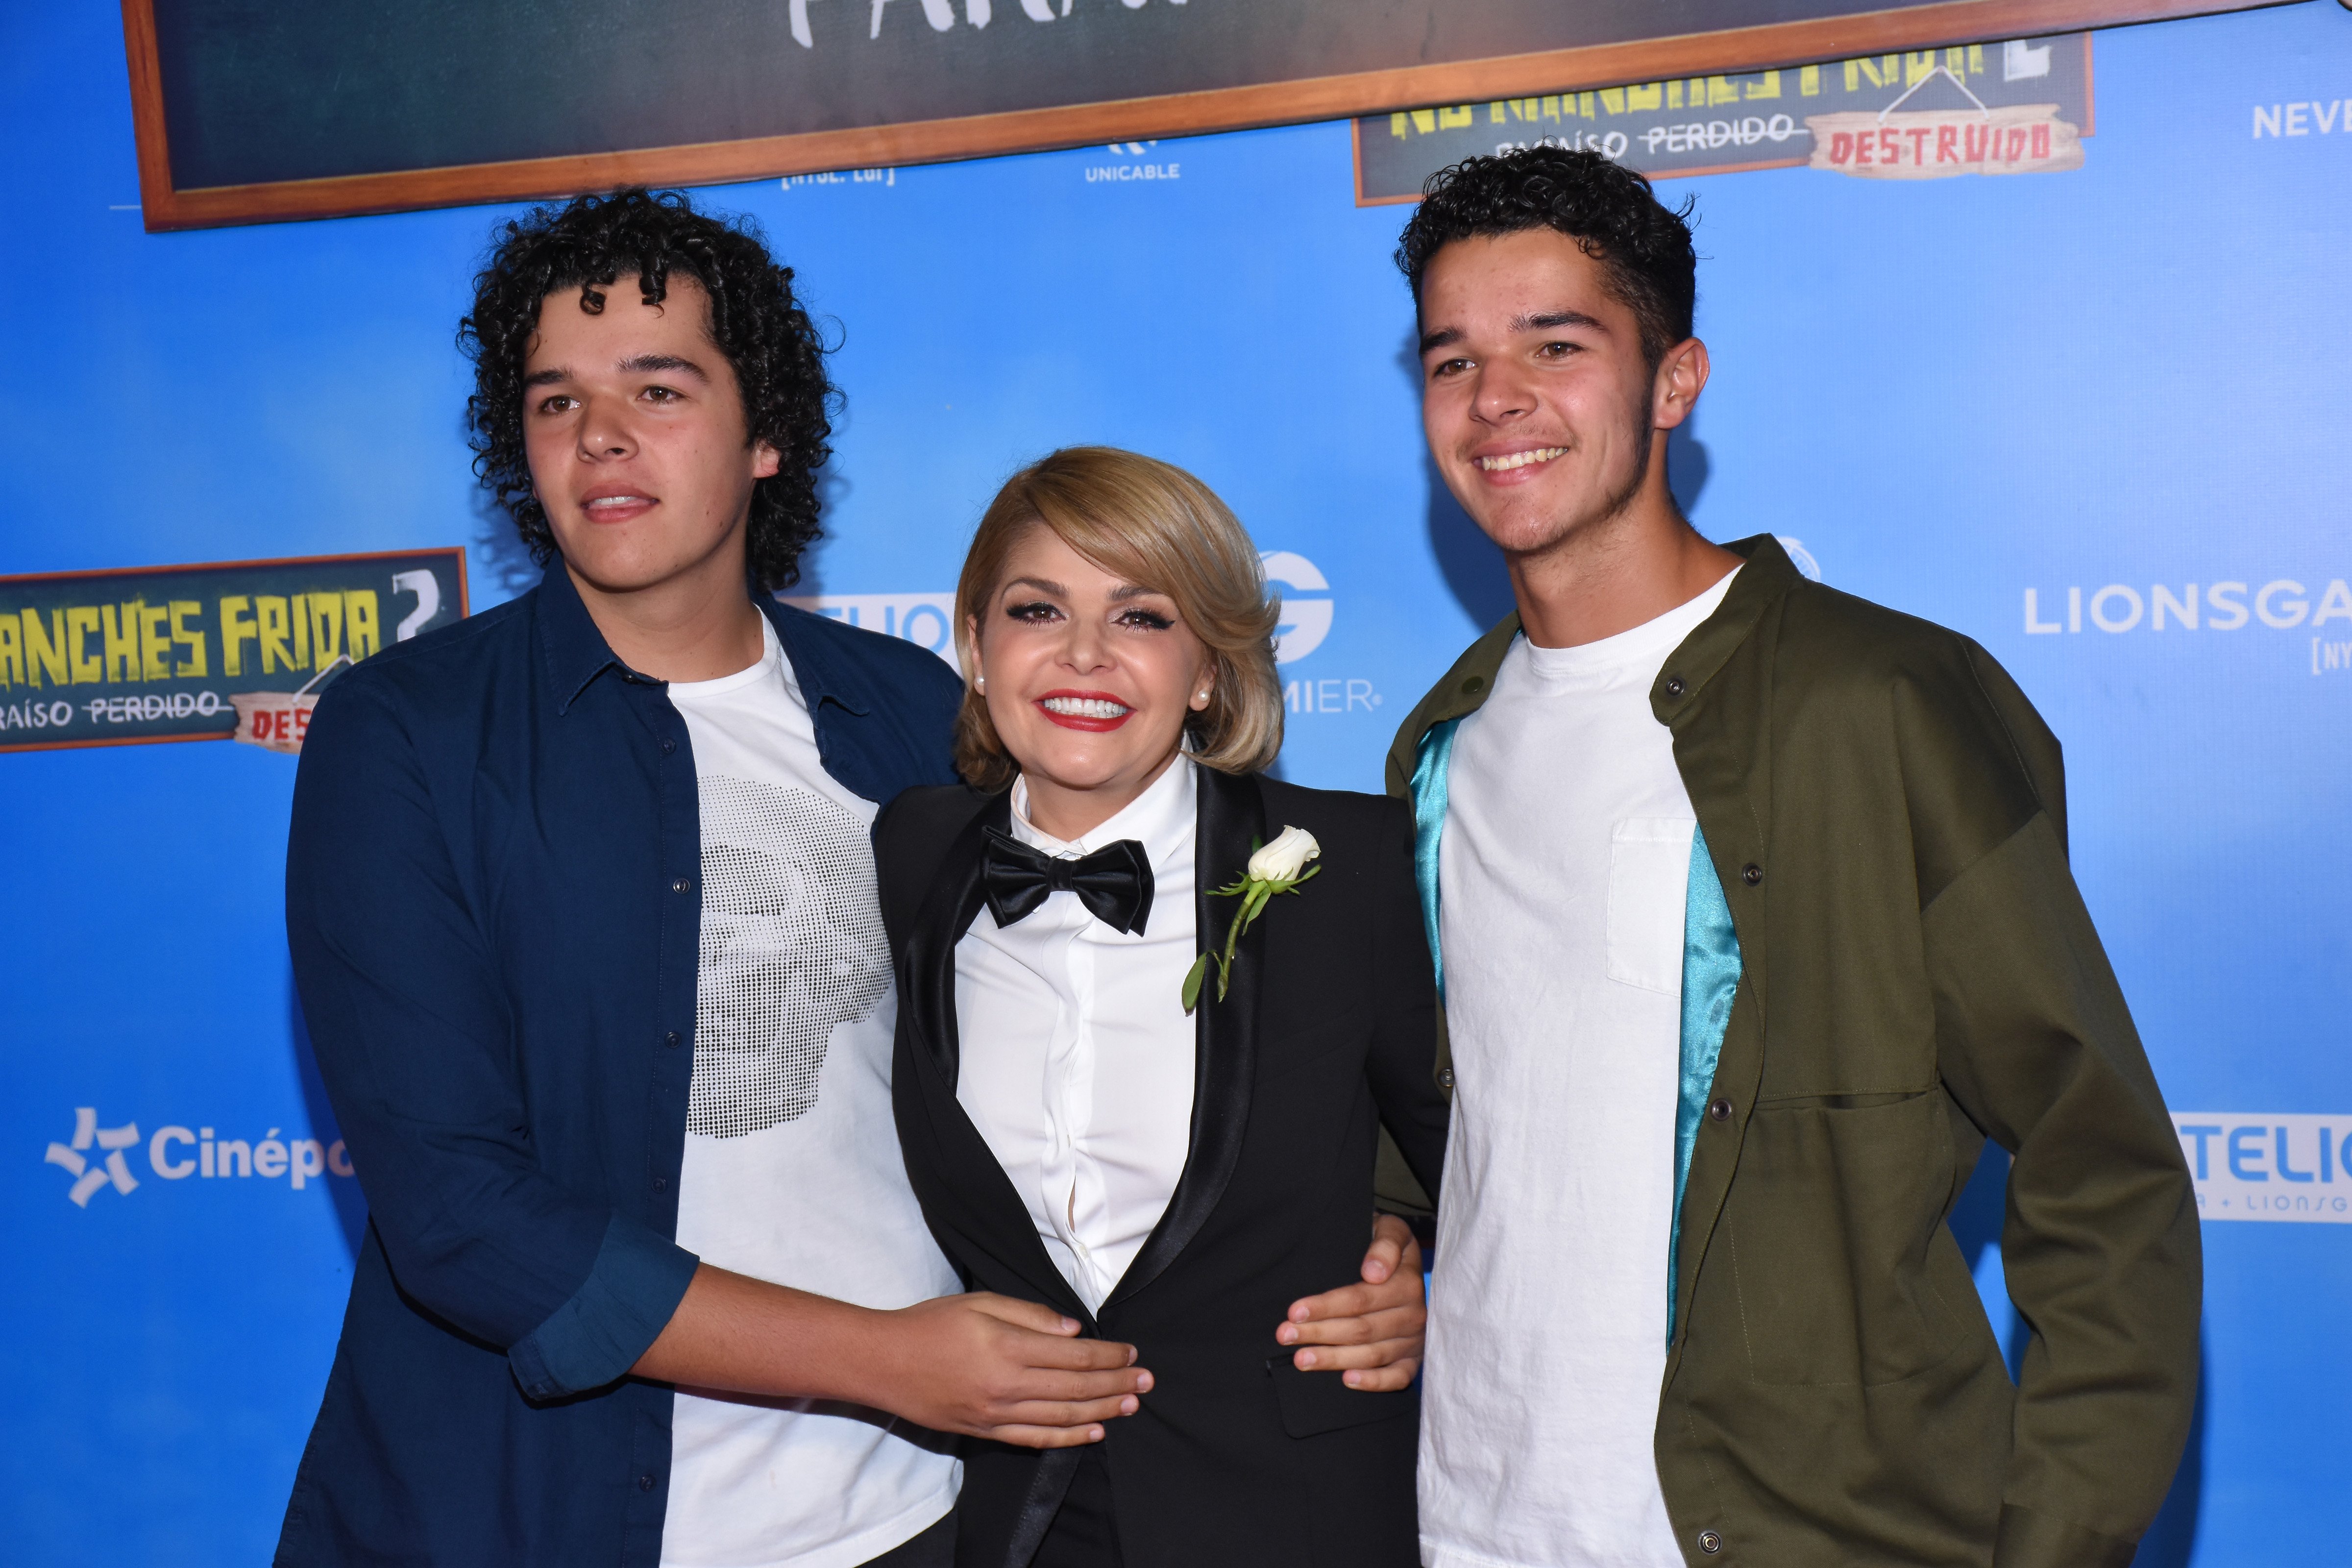 Itatí Cantoral and her children at the premiere of "No Manches Frida 2" in Mexico City.  |  Photo: Getty Images